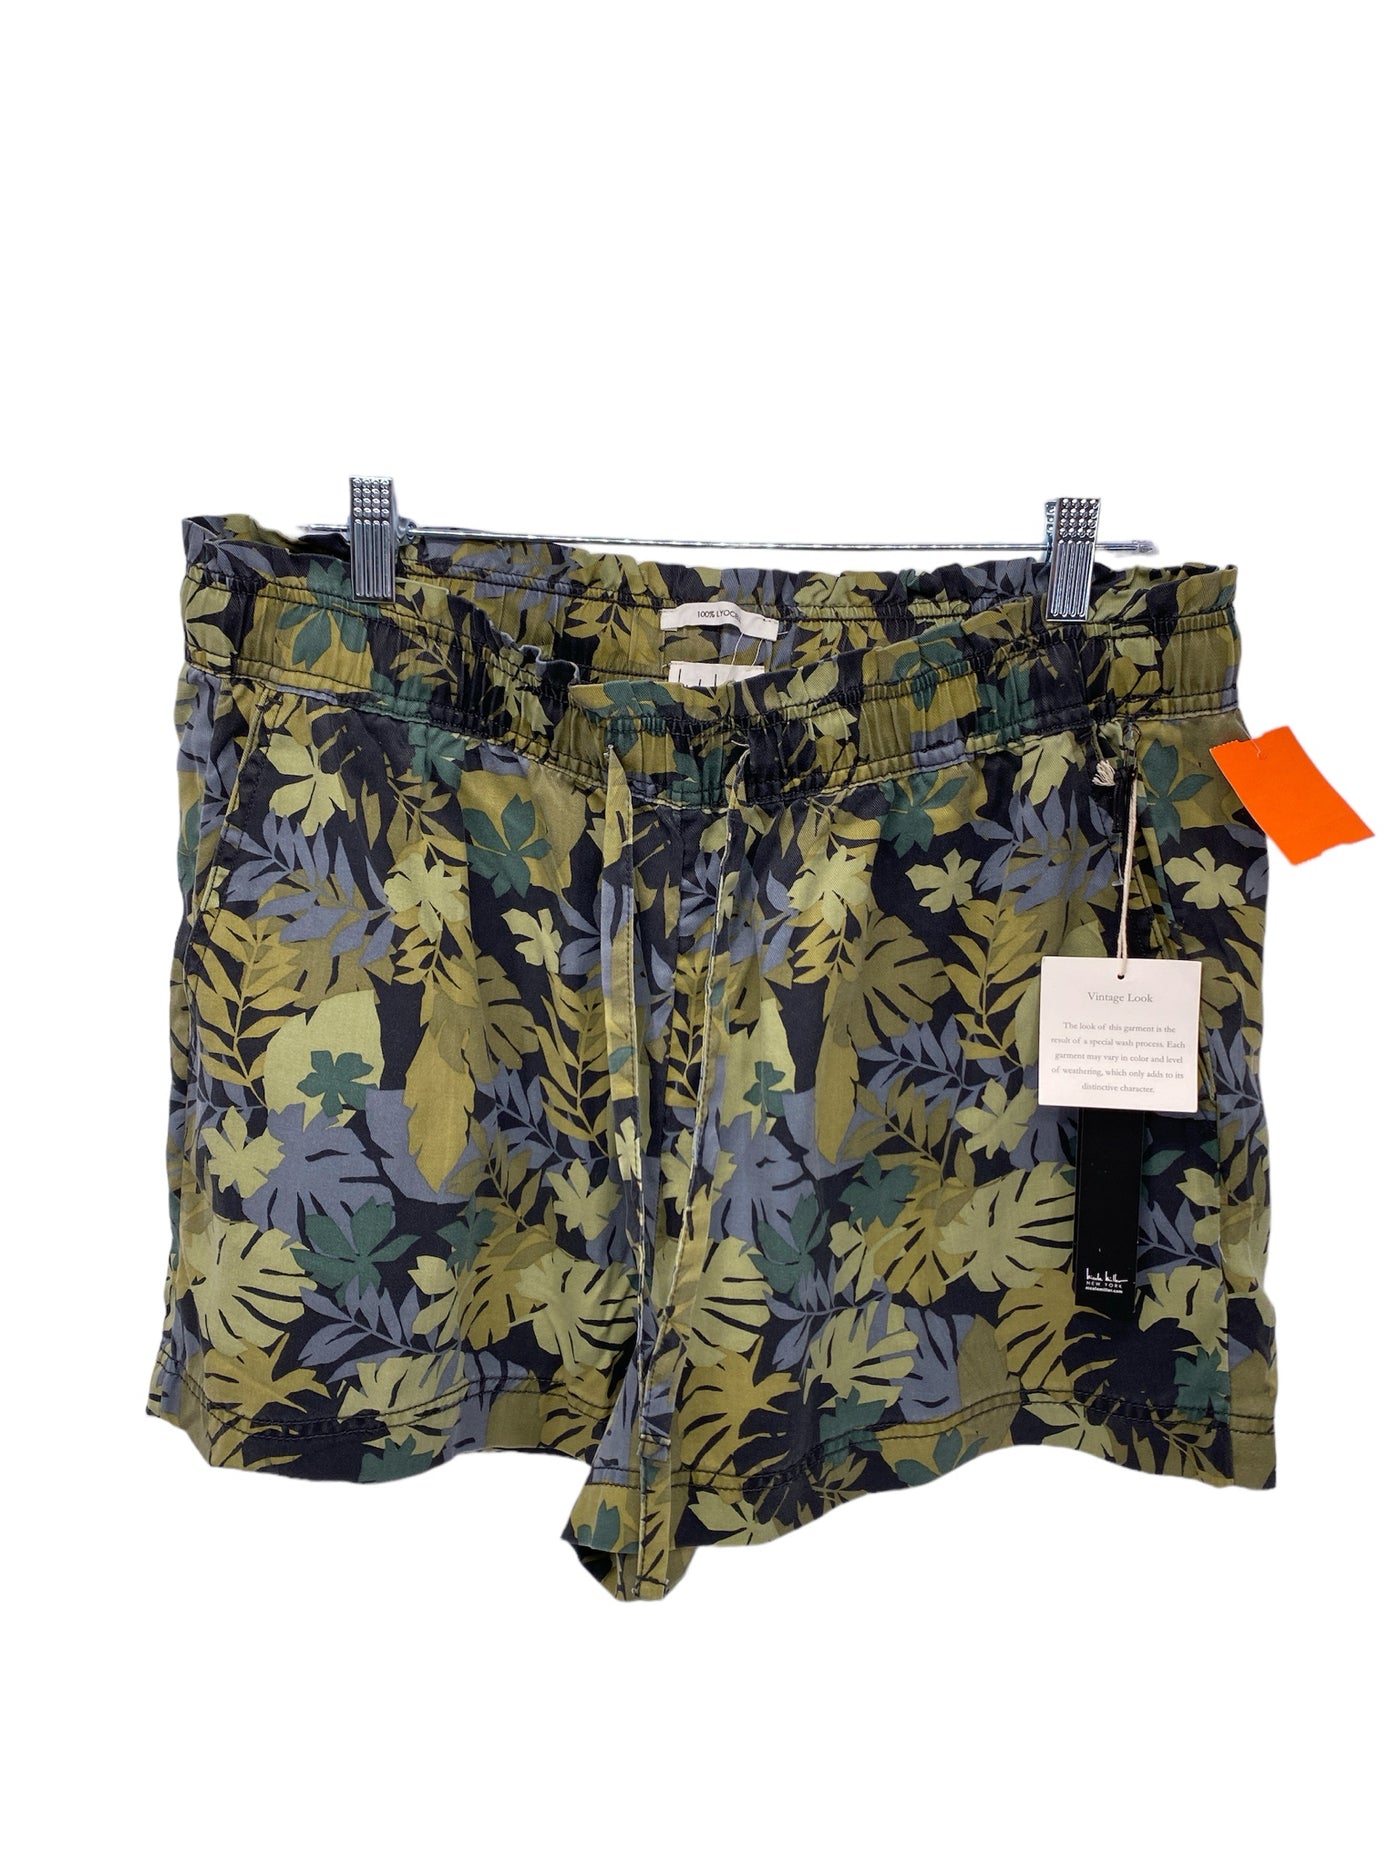 Nicole Miller Misses Size XL Camoflage New With Tags Shorts